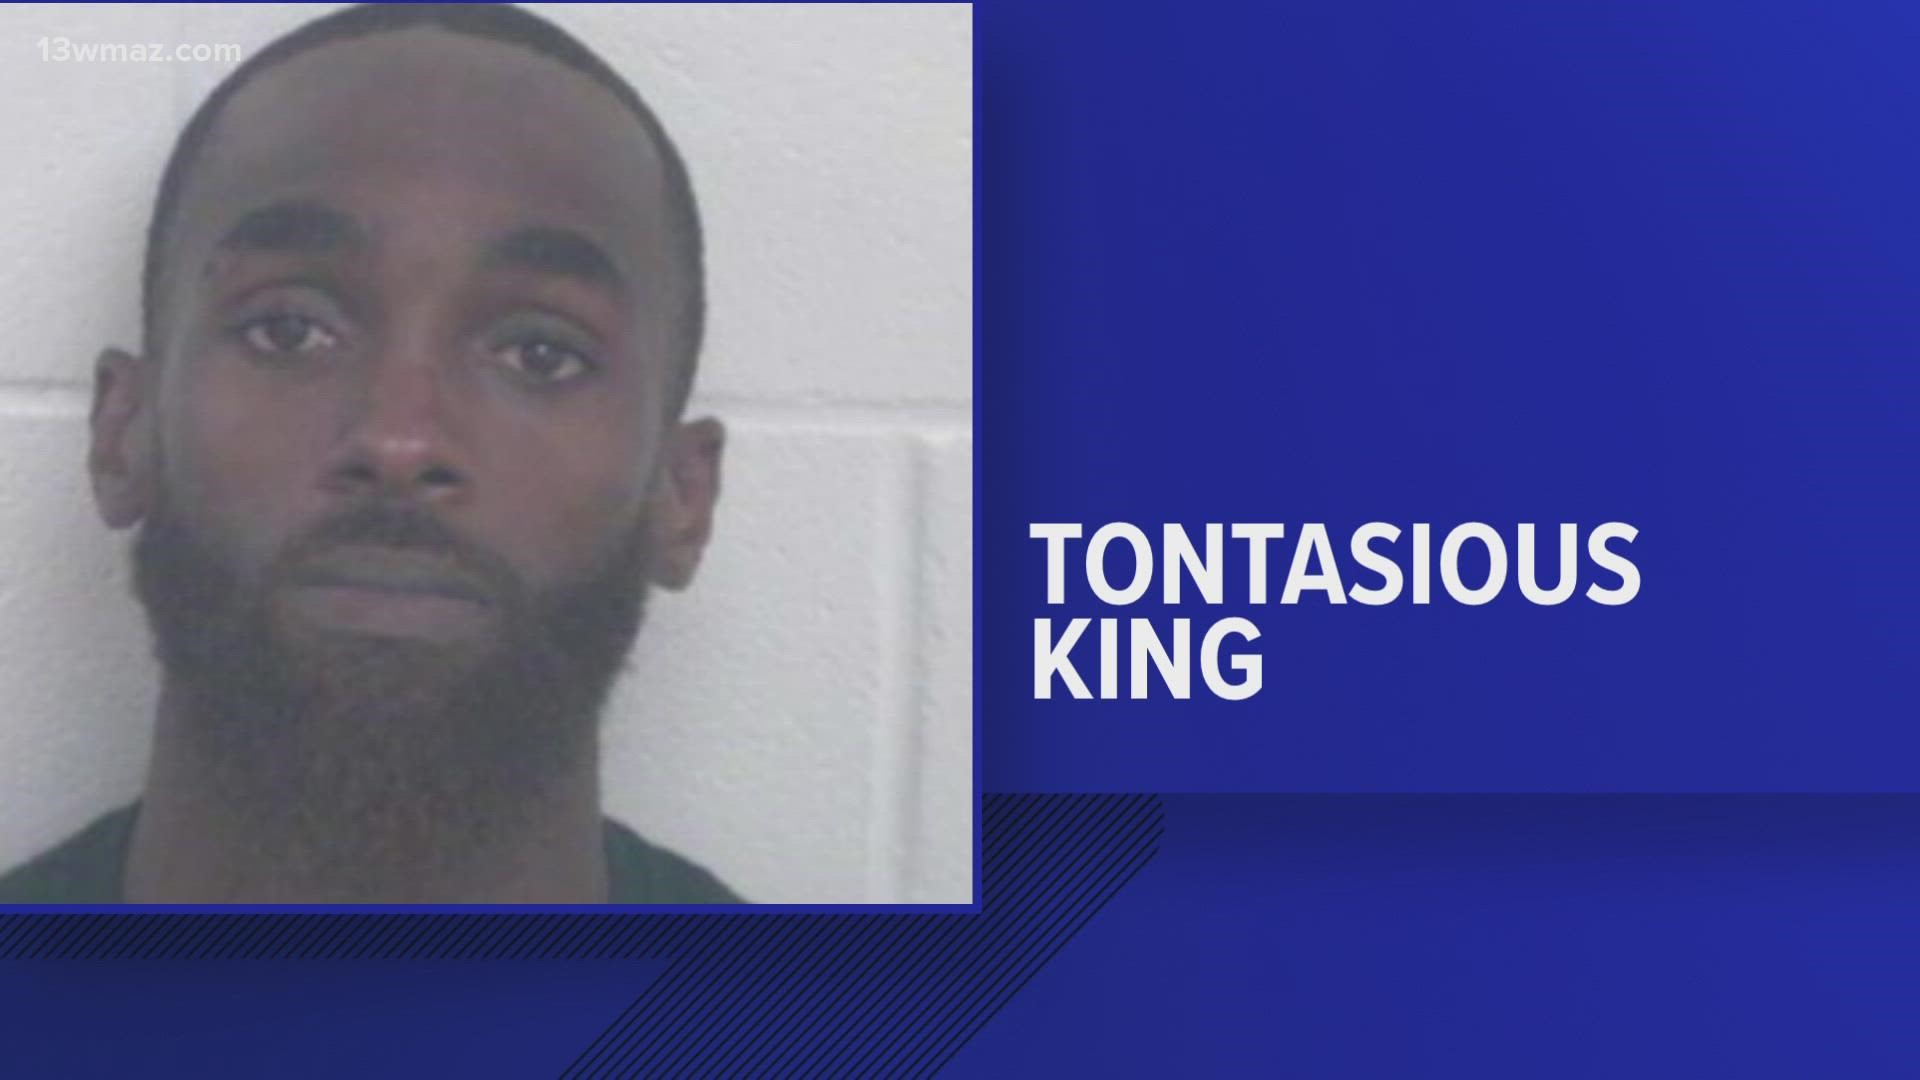 Tontasious Jermall King, 30, of Wrightsville has been charged with Aggravated Assault and Reckless Conduct